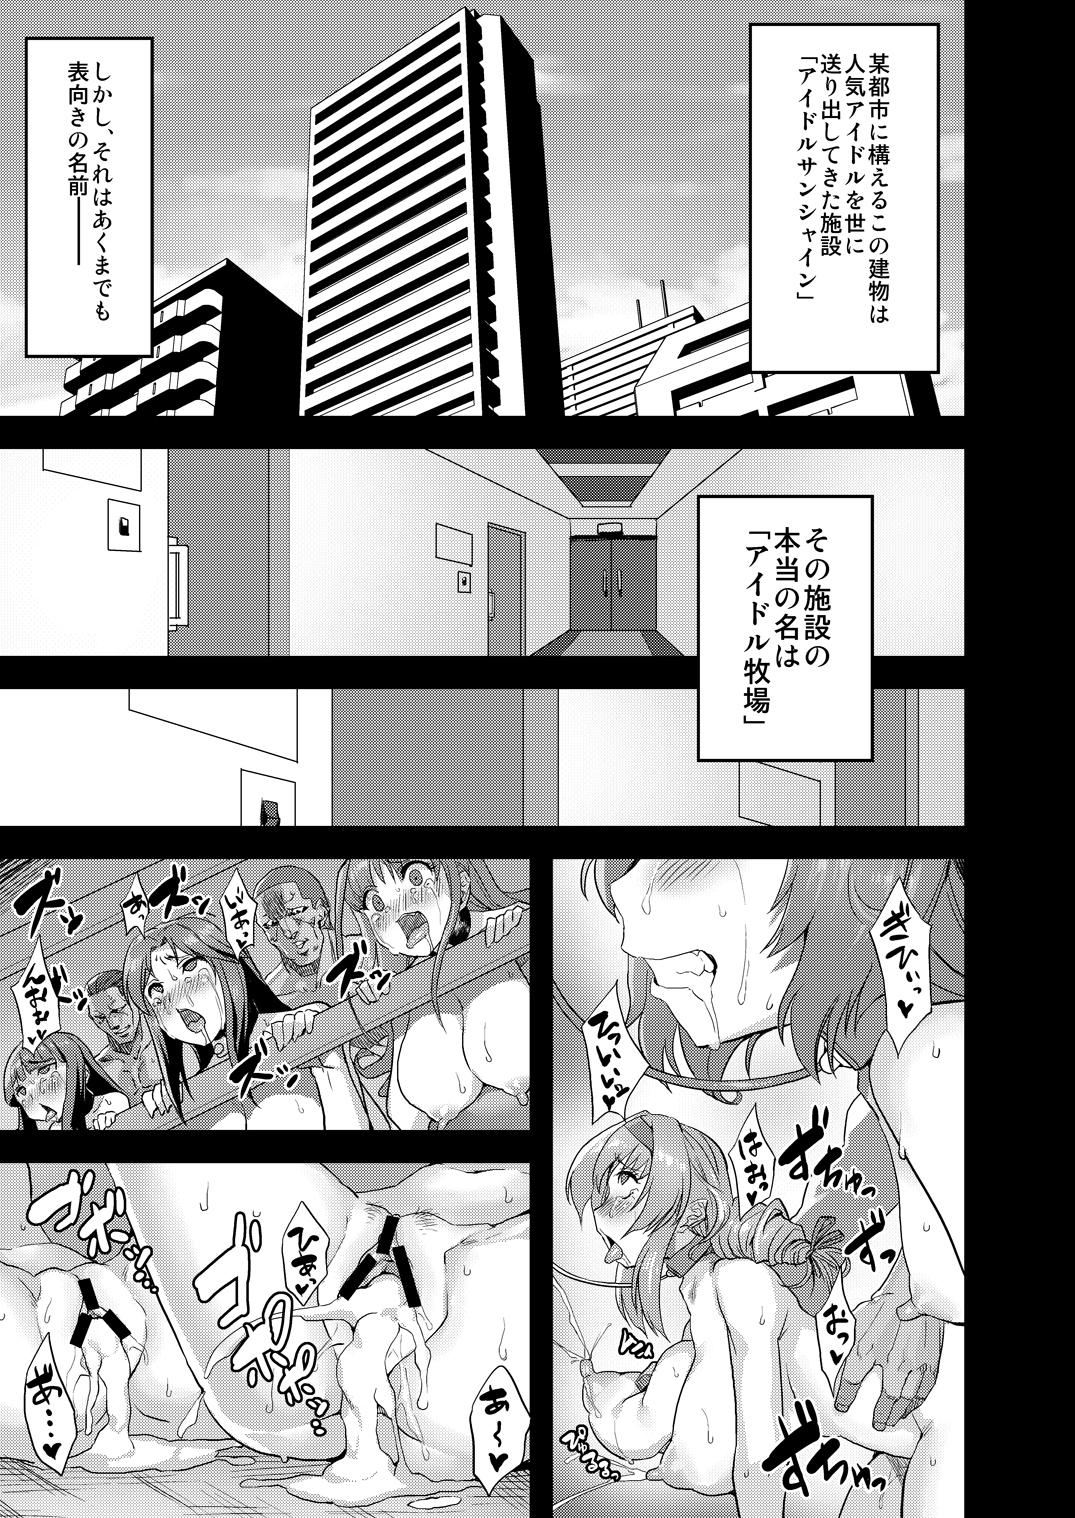 Asshole Hentai Idol Bokujou NEXT STAGE - The idolmaster Pigtails - Page 2